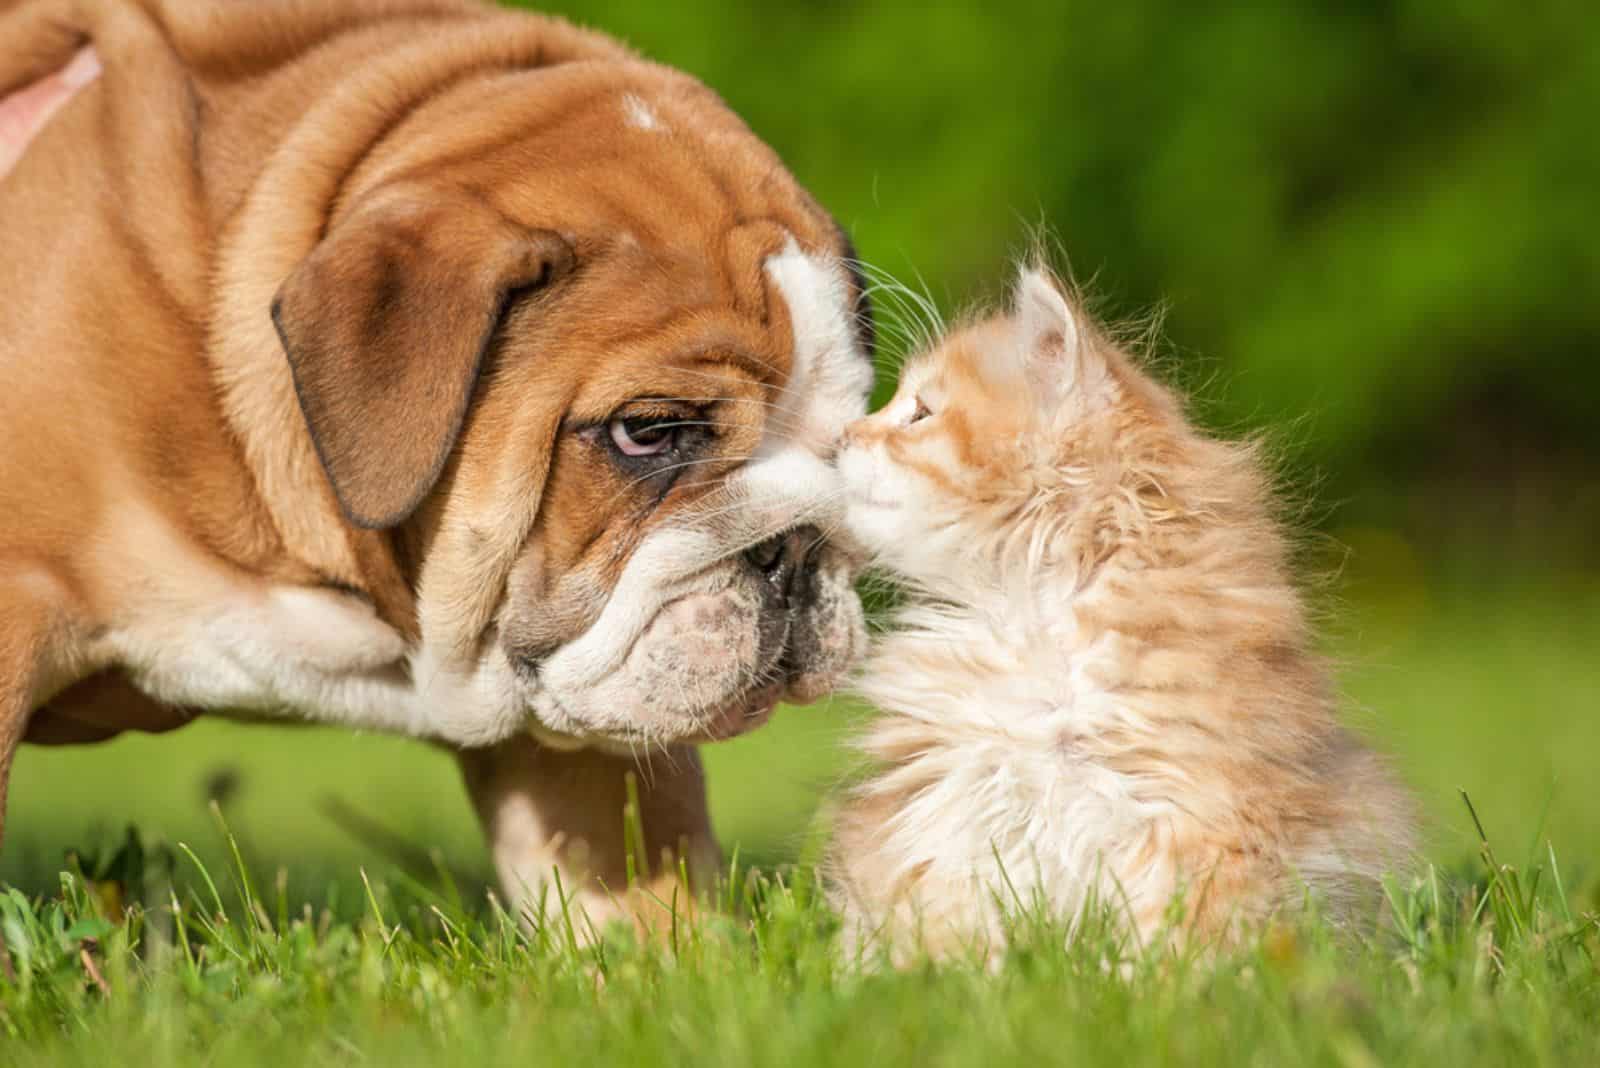 Bull Dog with cat